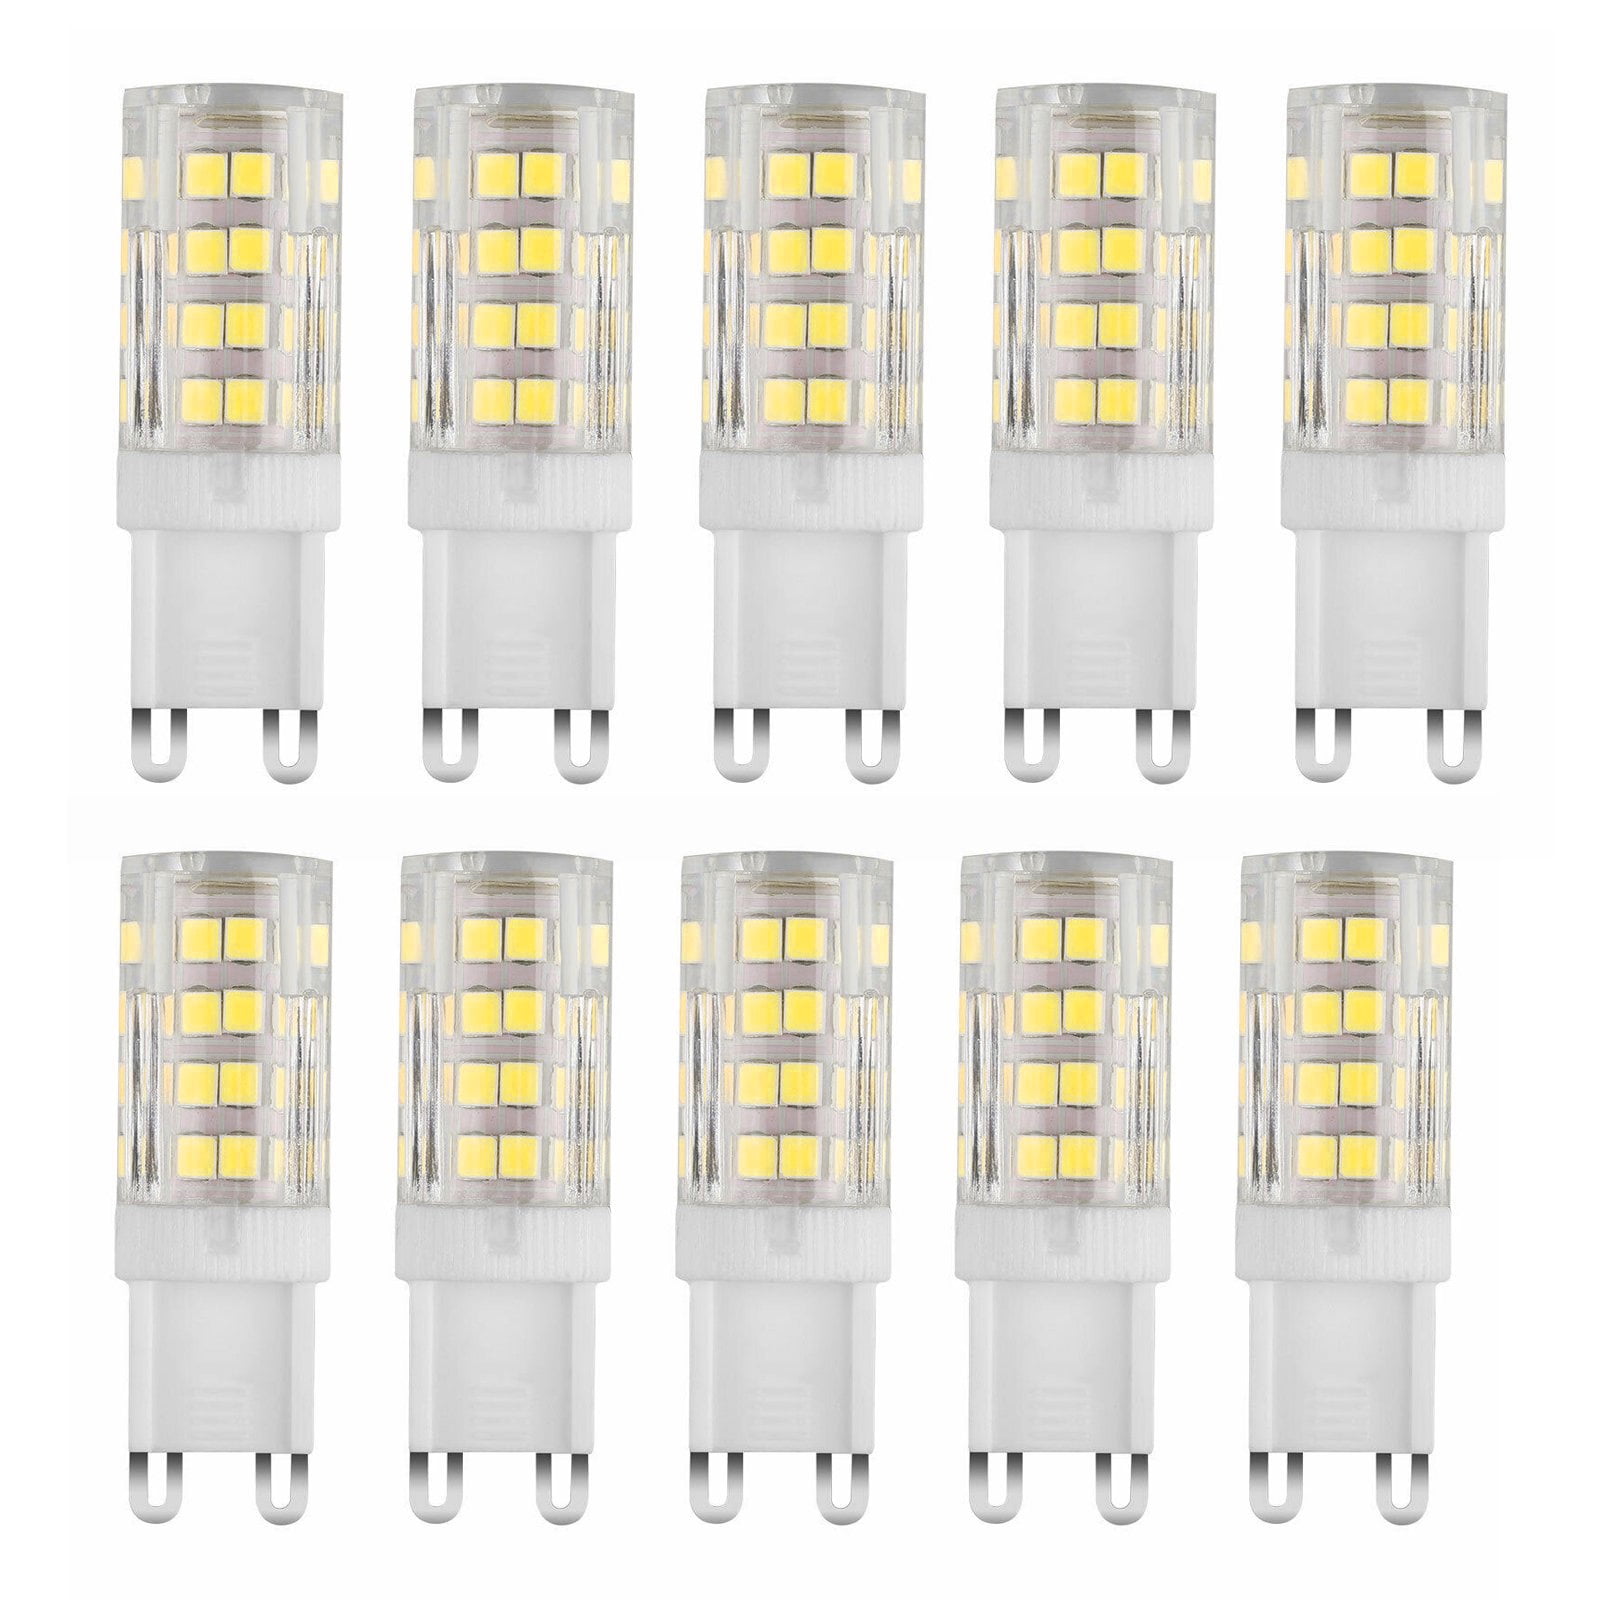 10x Halogen ECO Light Bulbs Clear Capsule Lamp Replaced G9 25W 3000K Warm White 